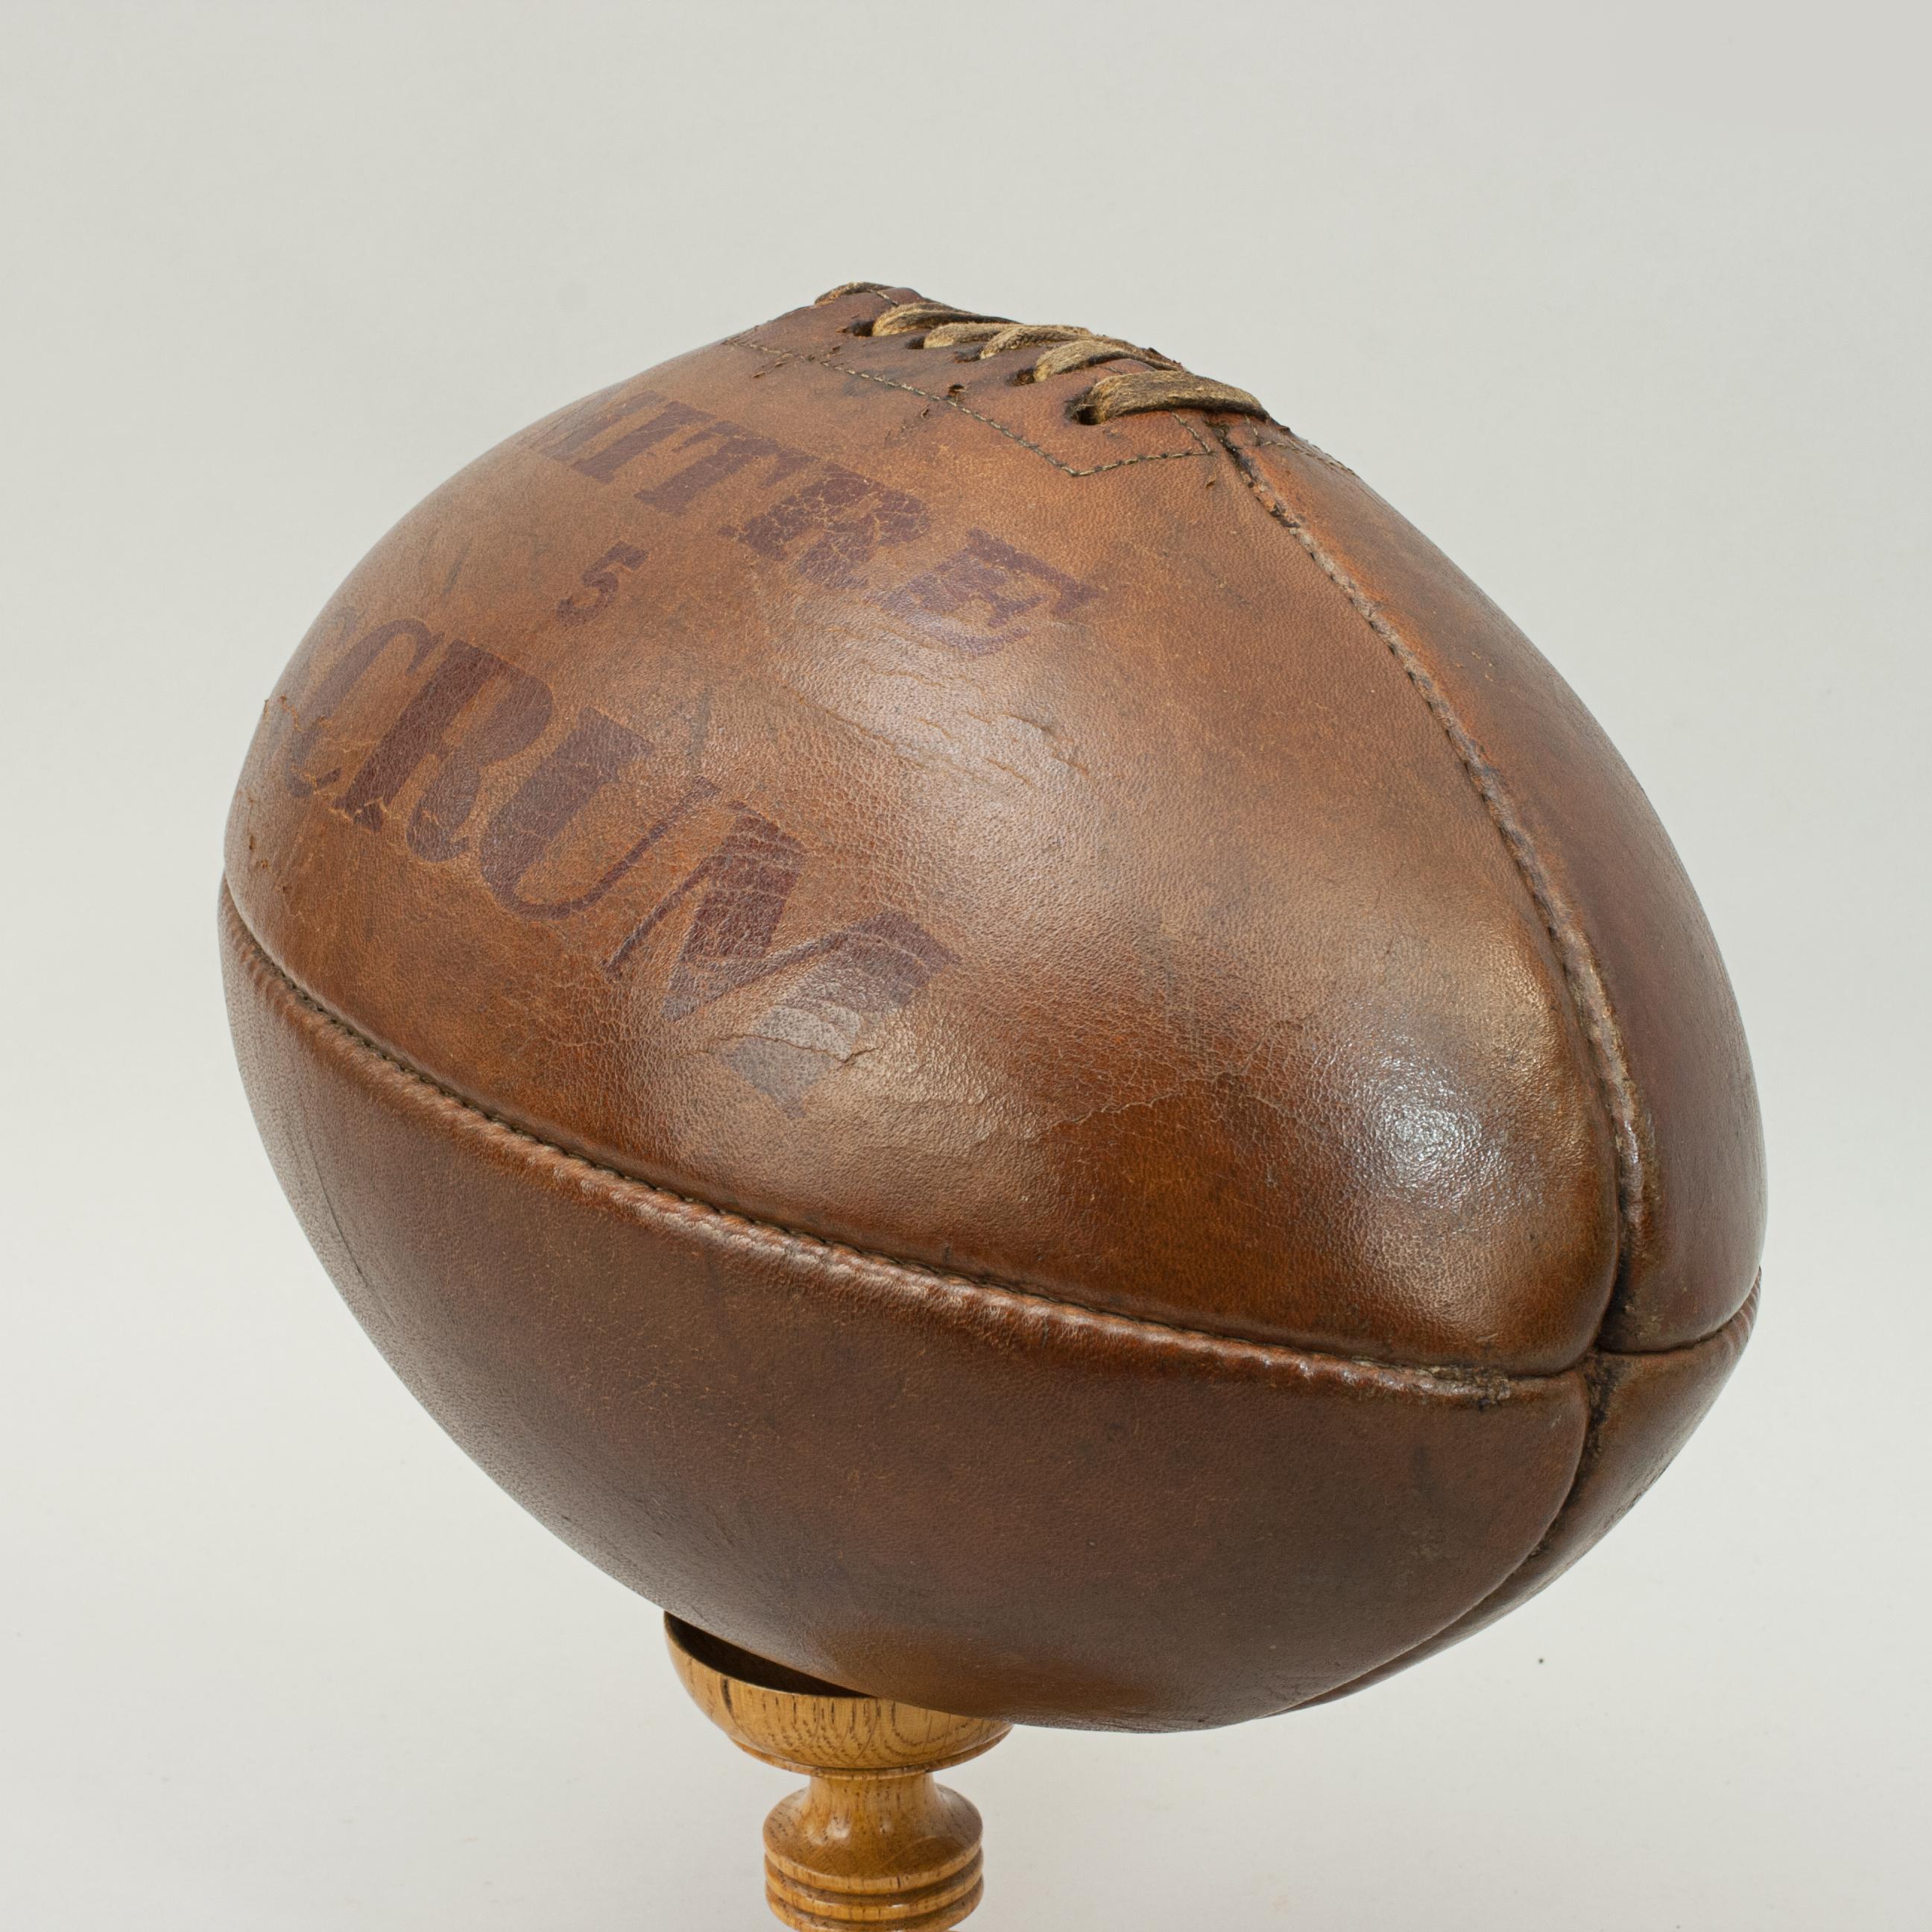 English Antique Leather Rugby Ball, Mitre Scrum No. 5